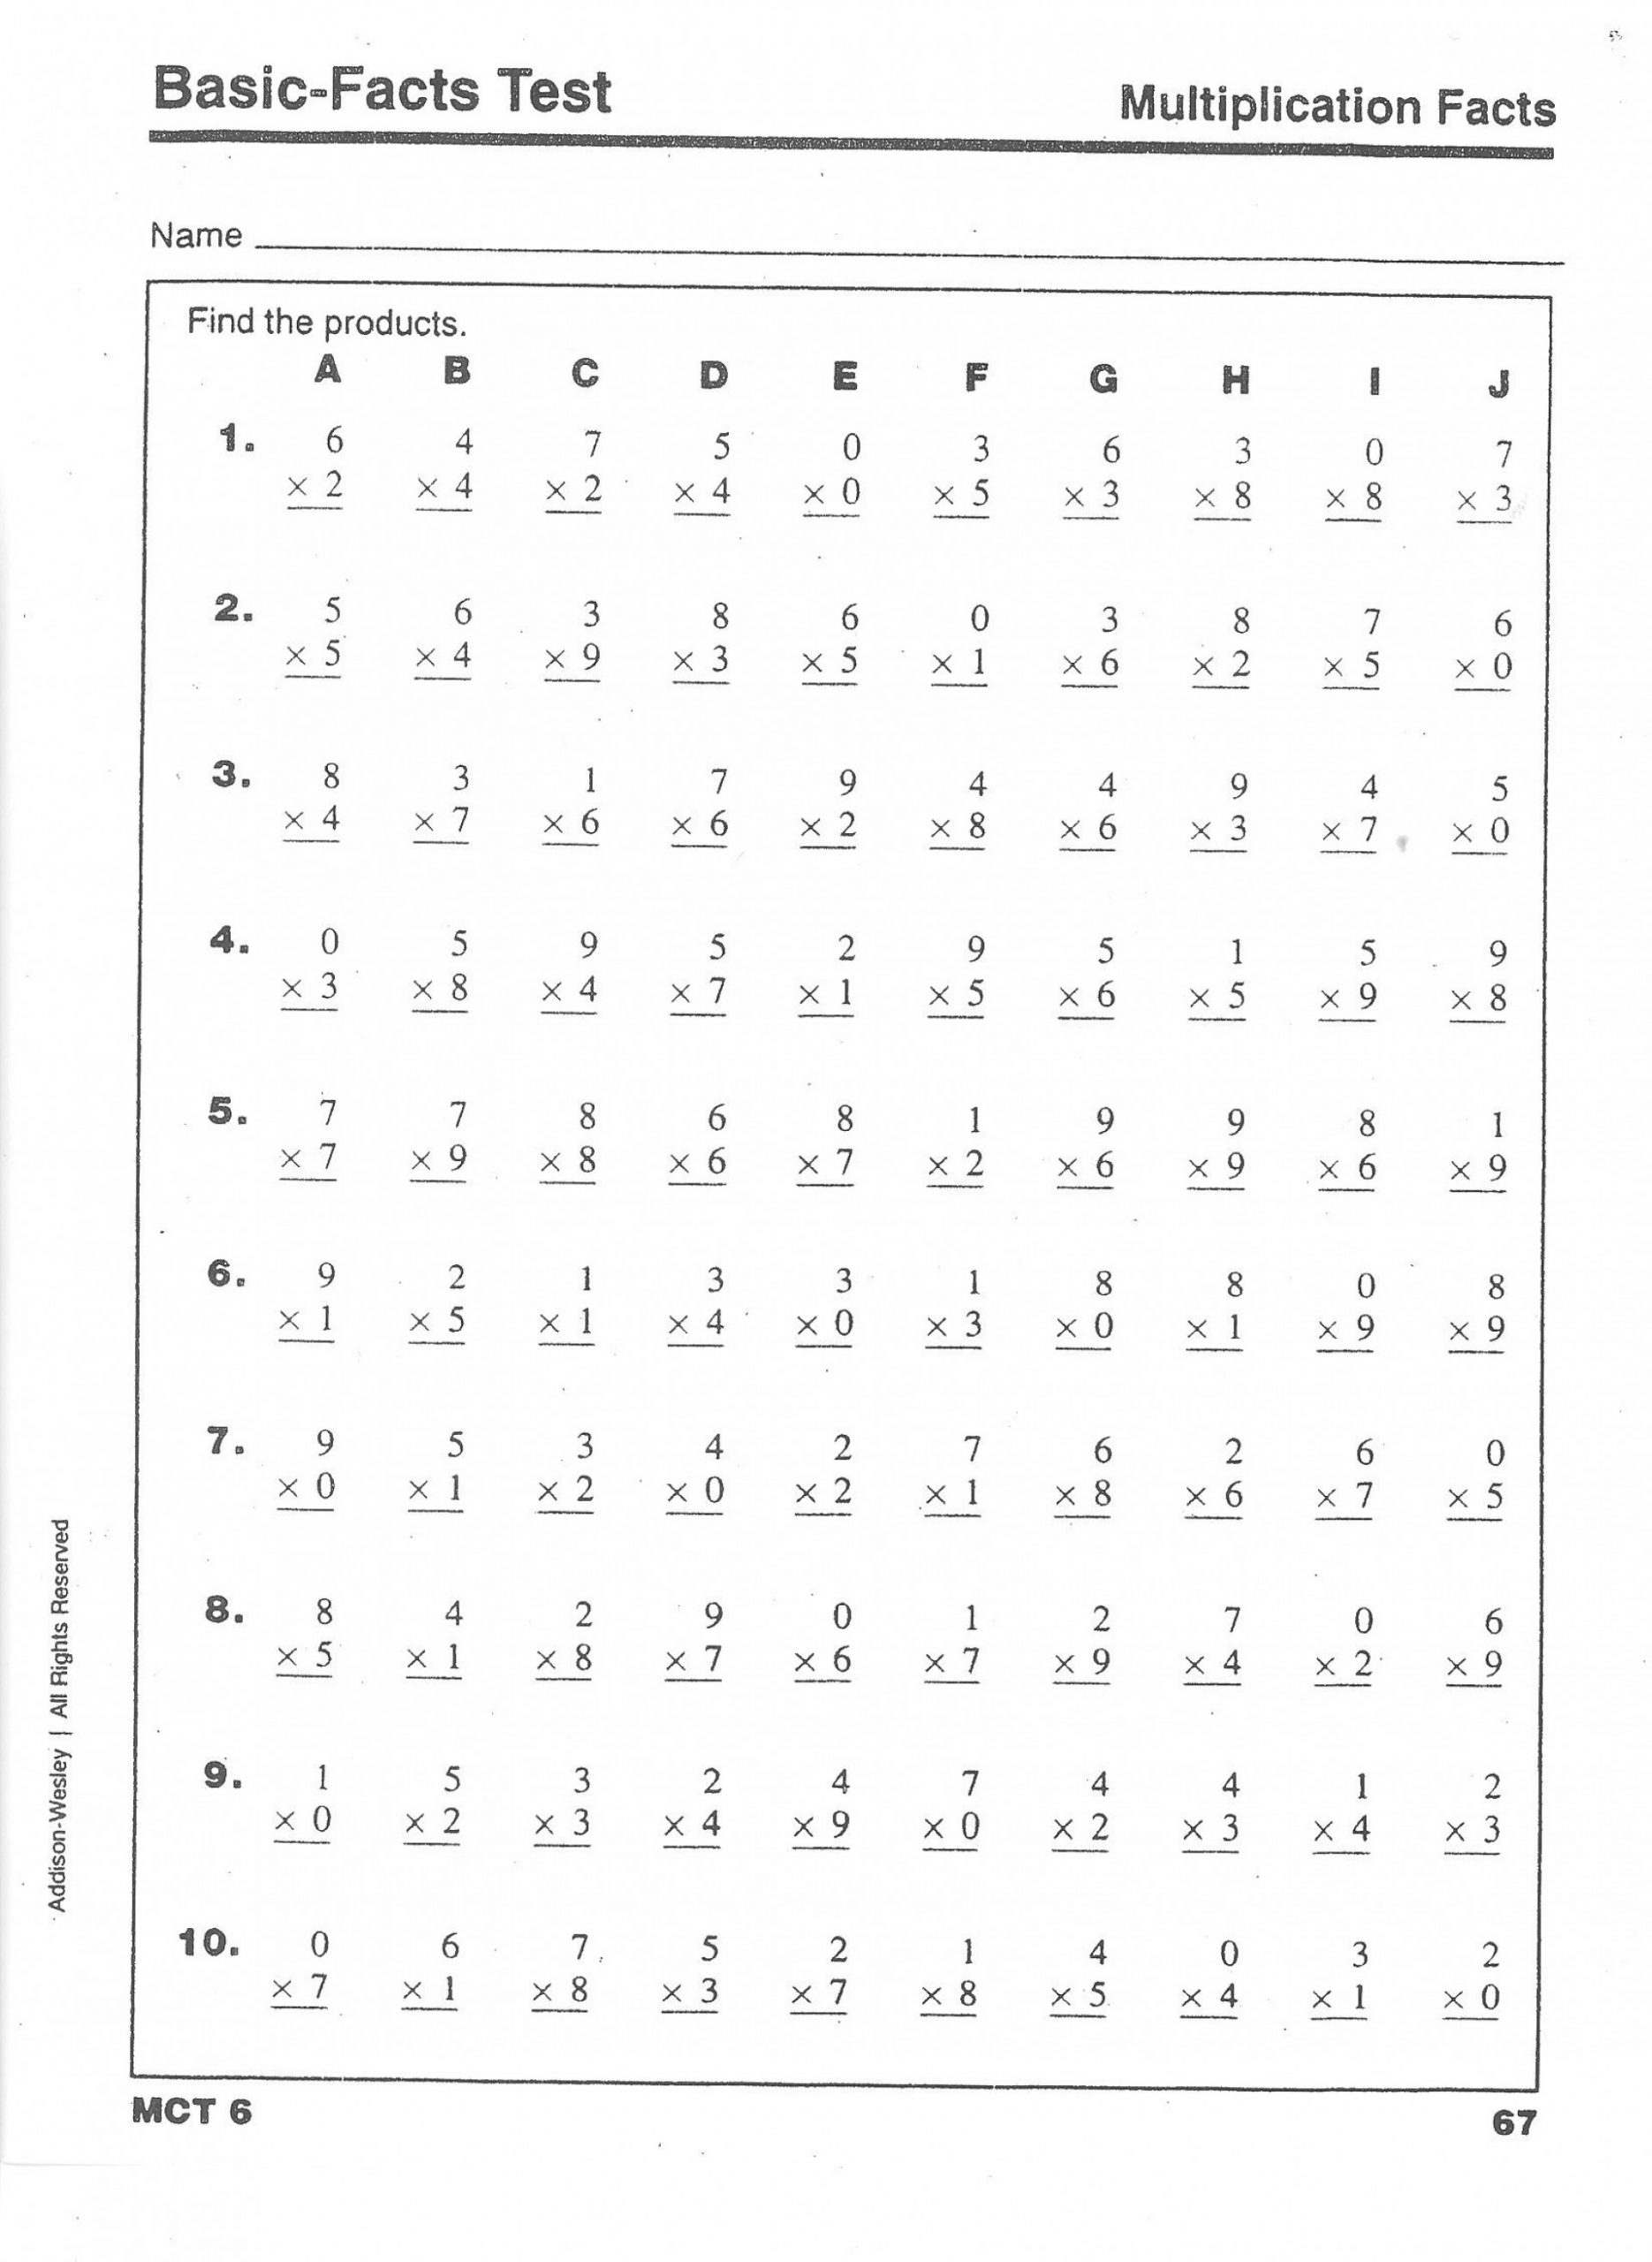 Multiplication Worksheets Two Minute Tests And Math Facts inside Printable Multiplication Timed Tests